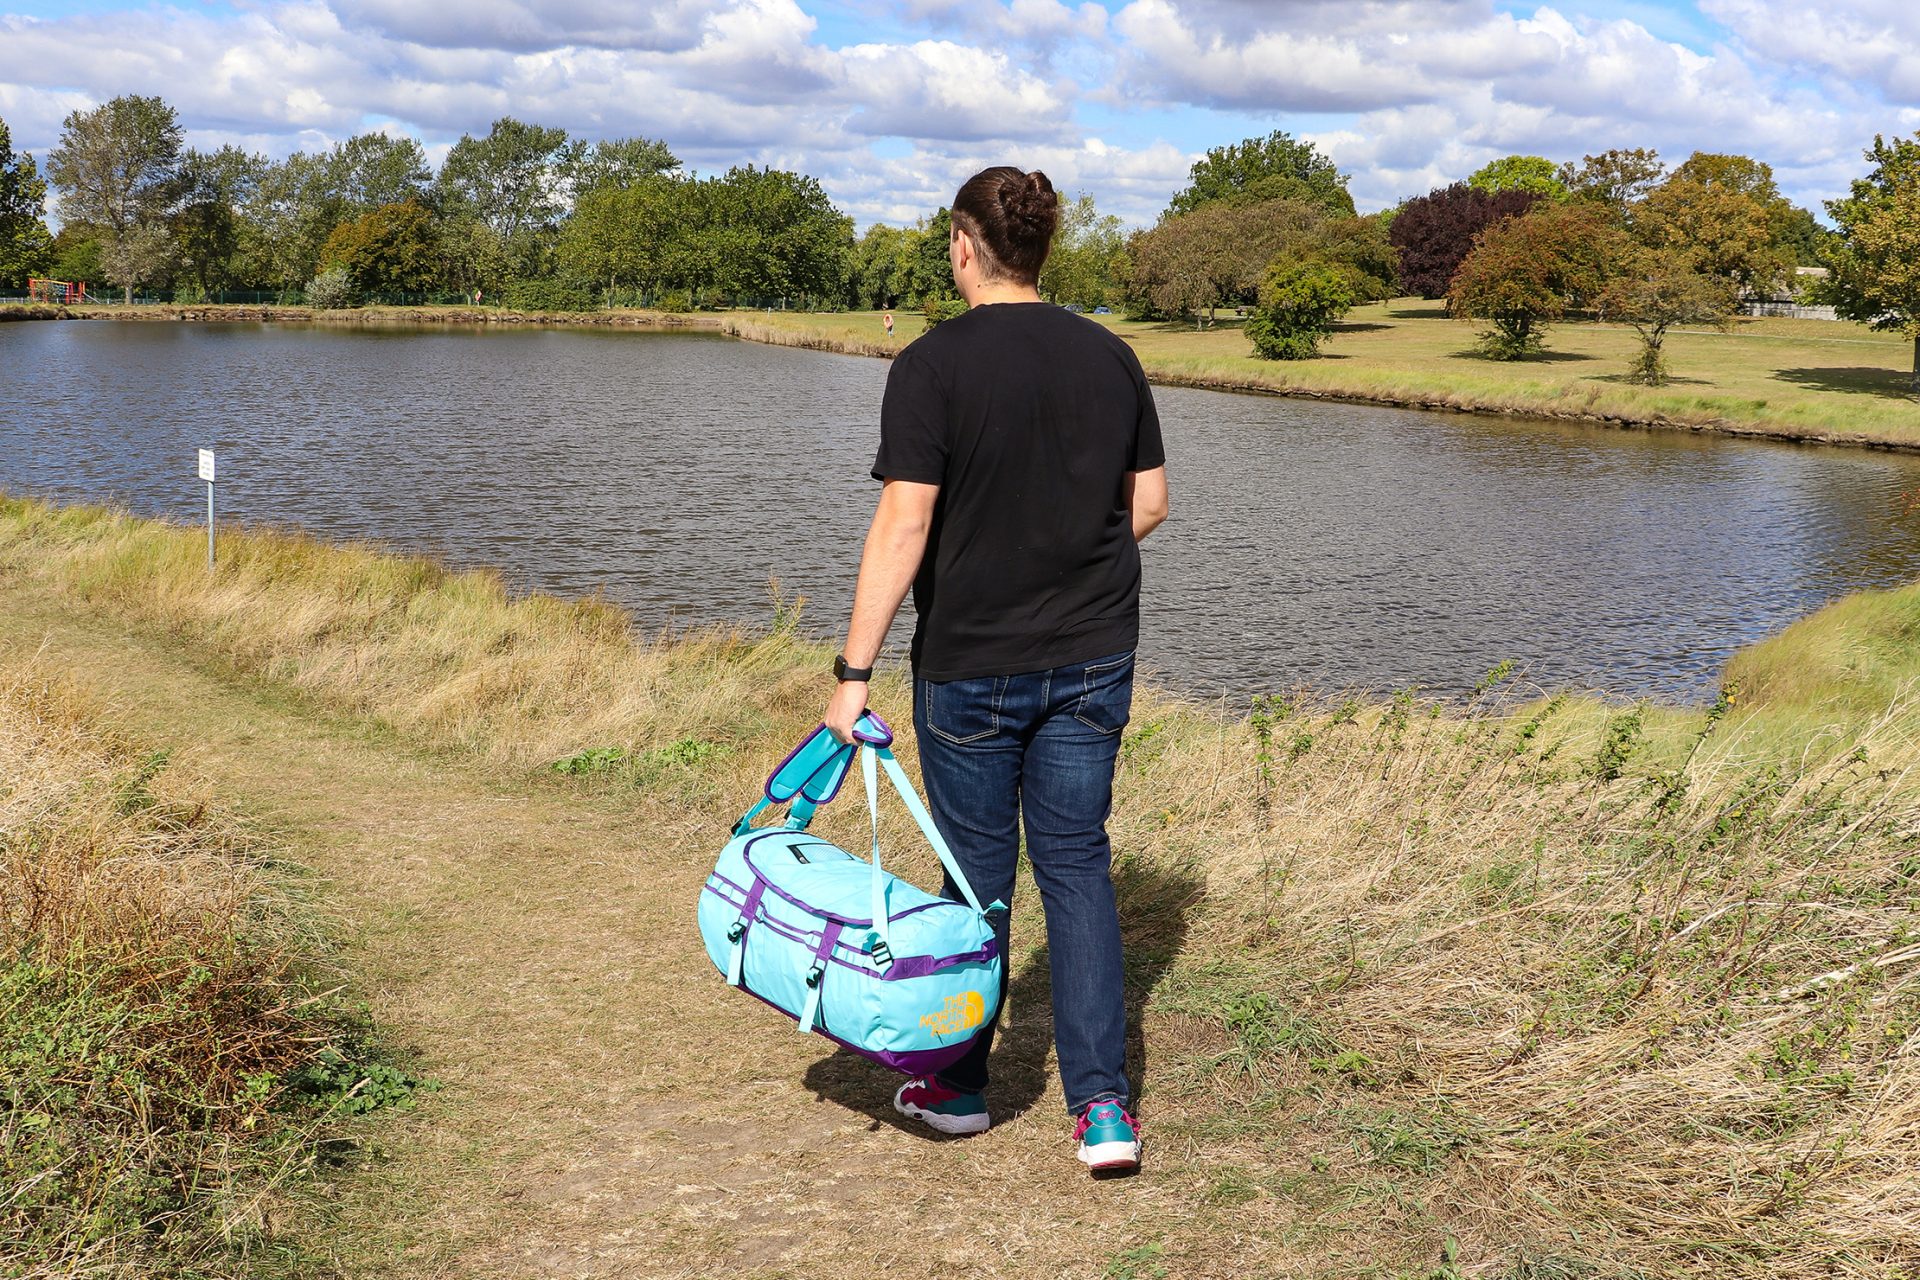 Carrying The North Face Base Camp Duffel As A Duffel In Essex England